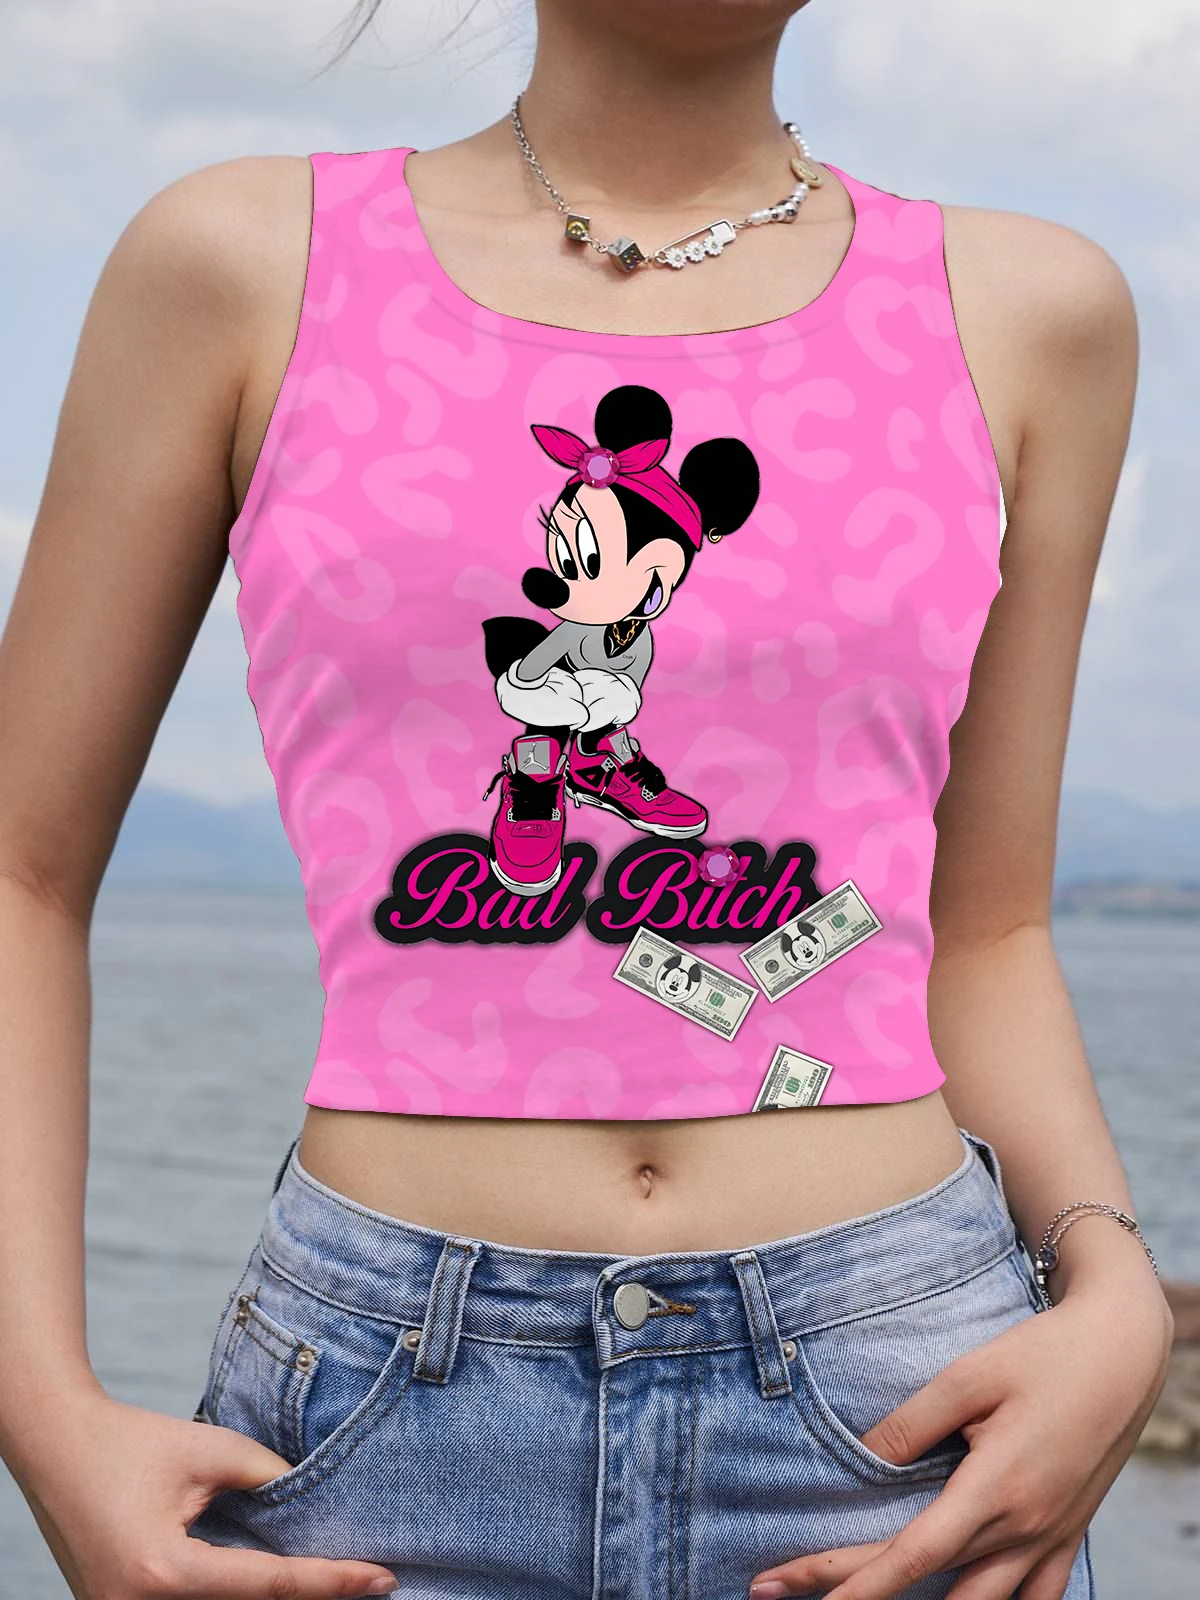 https://ae01.alicdn.com/kf/Sc5d0b05e189949828cefe212cc0b3e23c/Yoga-Fitness-Crop-Tops-for-Women-Disney-Tank-Top-Minnie-Mouse-Corset-Fashion-Y2k-Sexy-Mickey.jpg